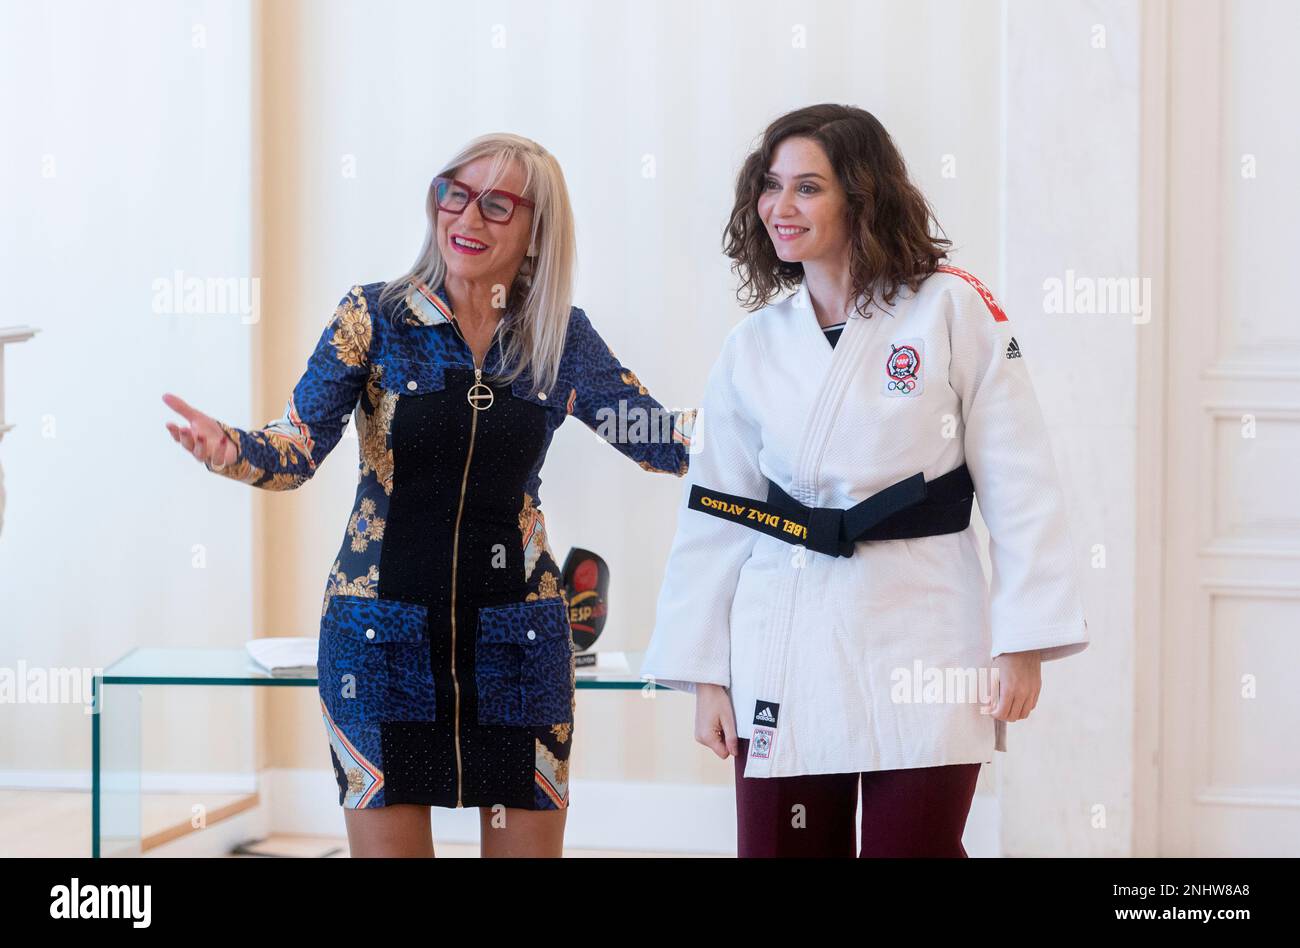 The president of the Madrid Judo Federation, Meli Lorenzo (l), presents to  the president of the Community of Madrid, Isabel Díaz Ayuso (r), the  honorary black belt awarded by the Madrid Judo